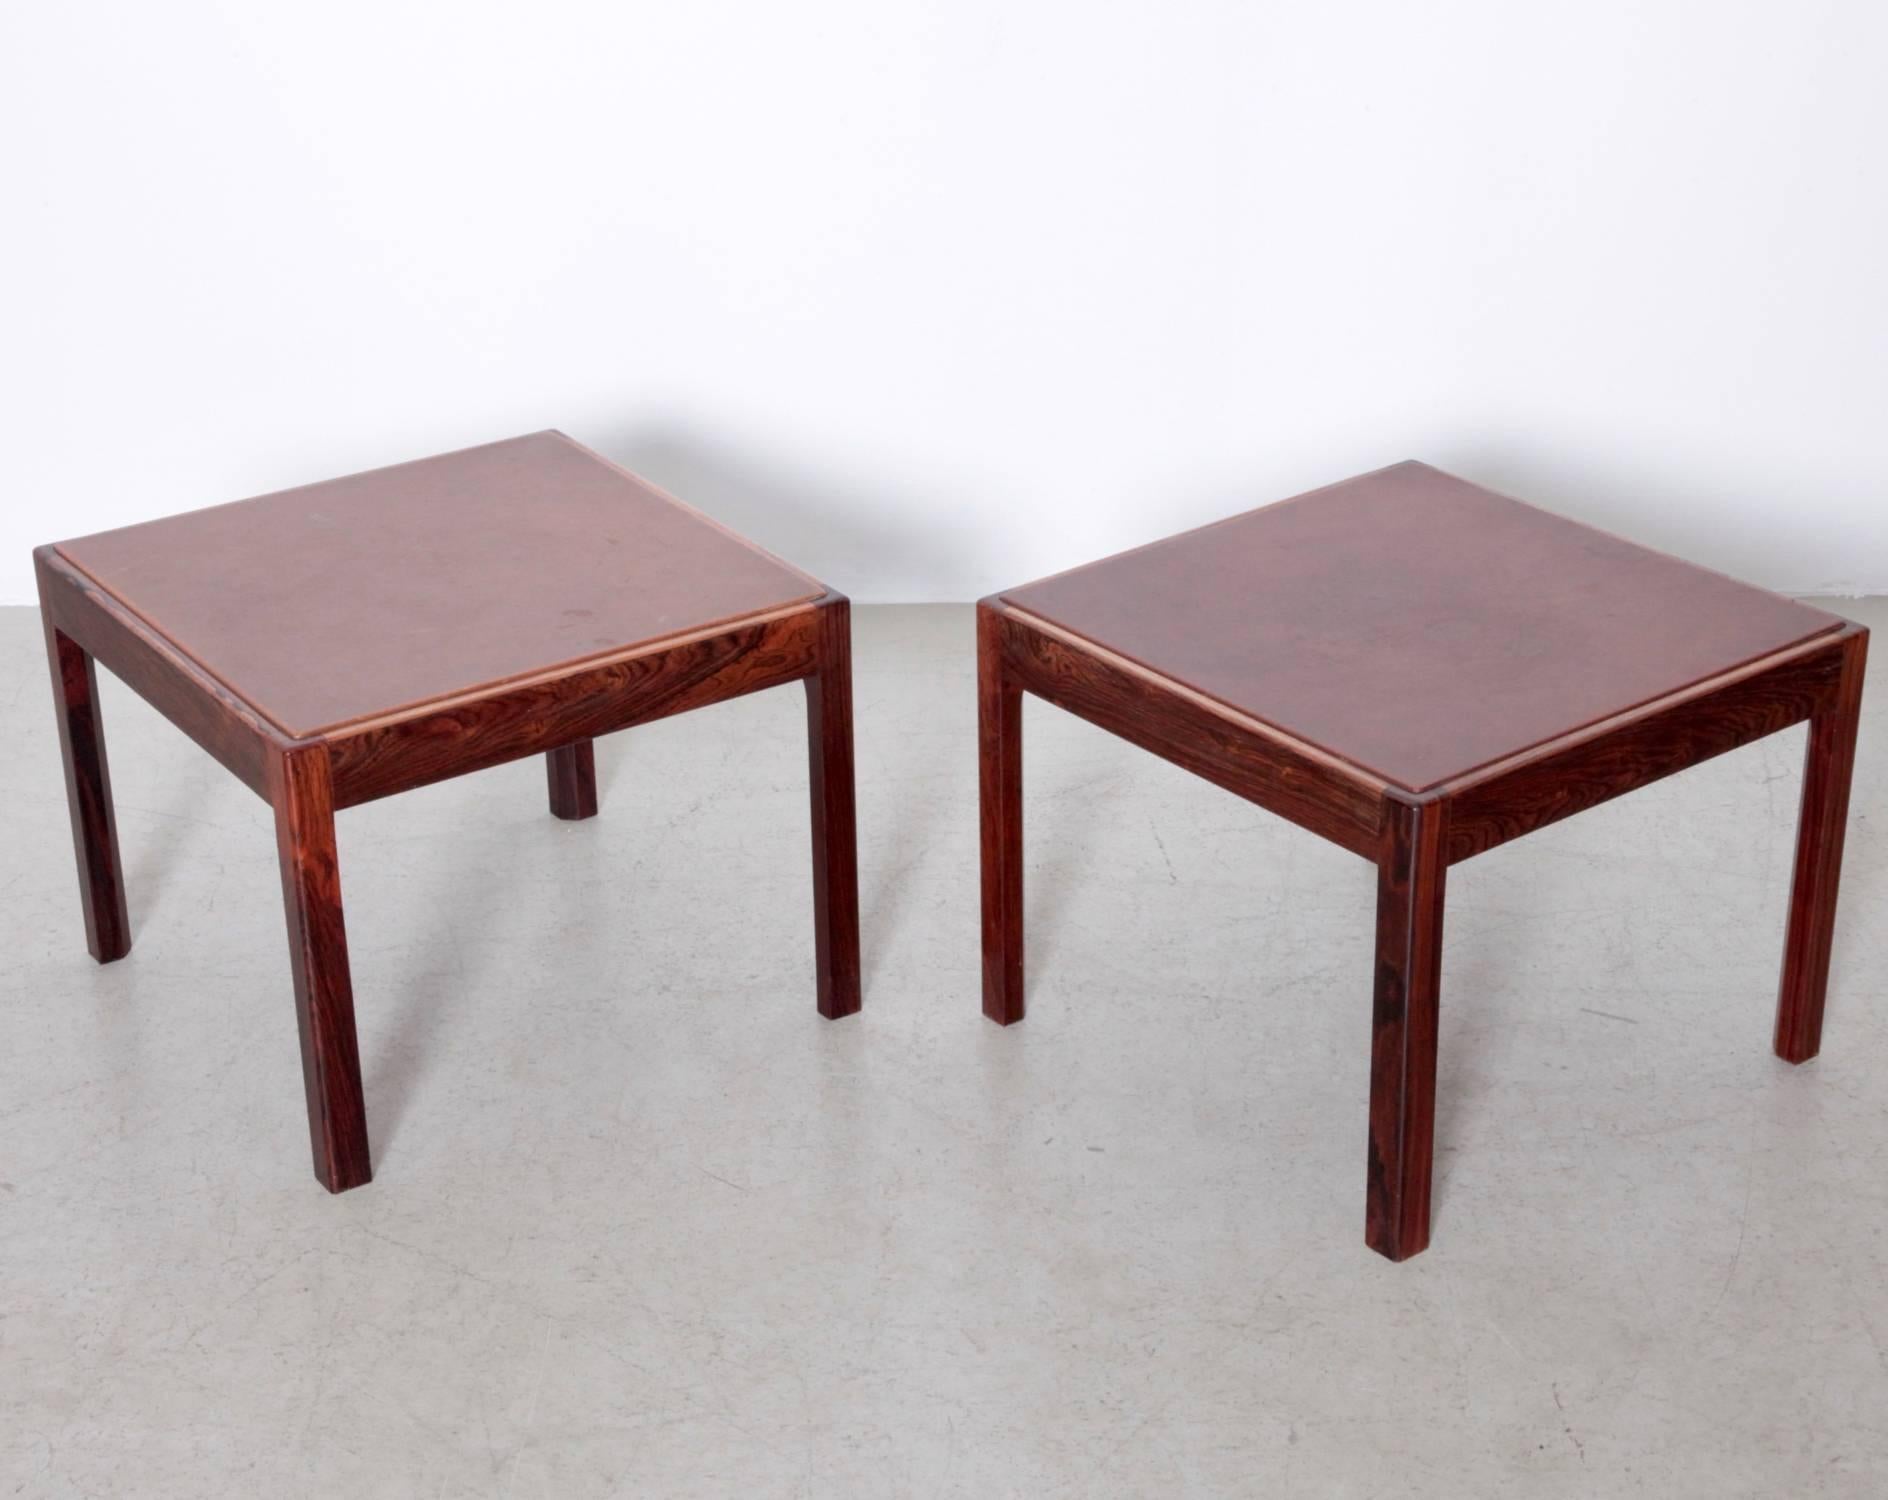 Nice 1960s pair of rosewood side table with original leather top in a beautiful vintage patina on the leather.